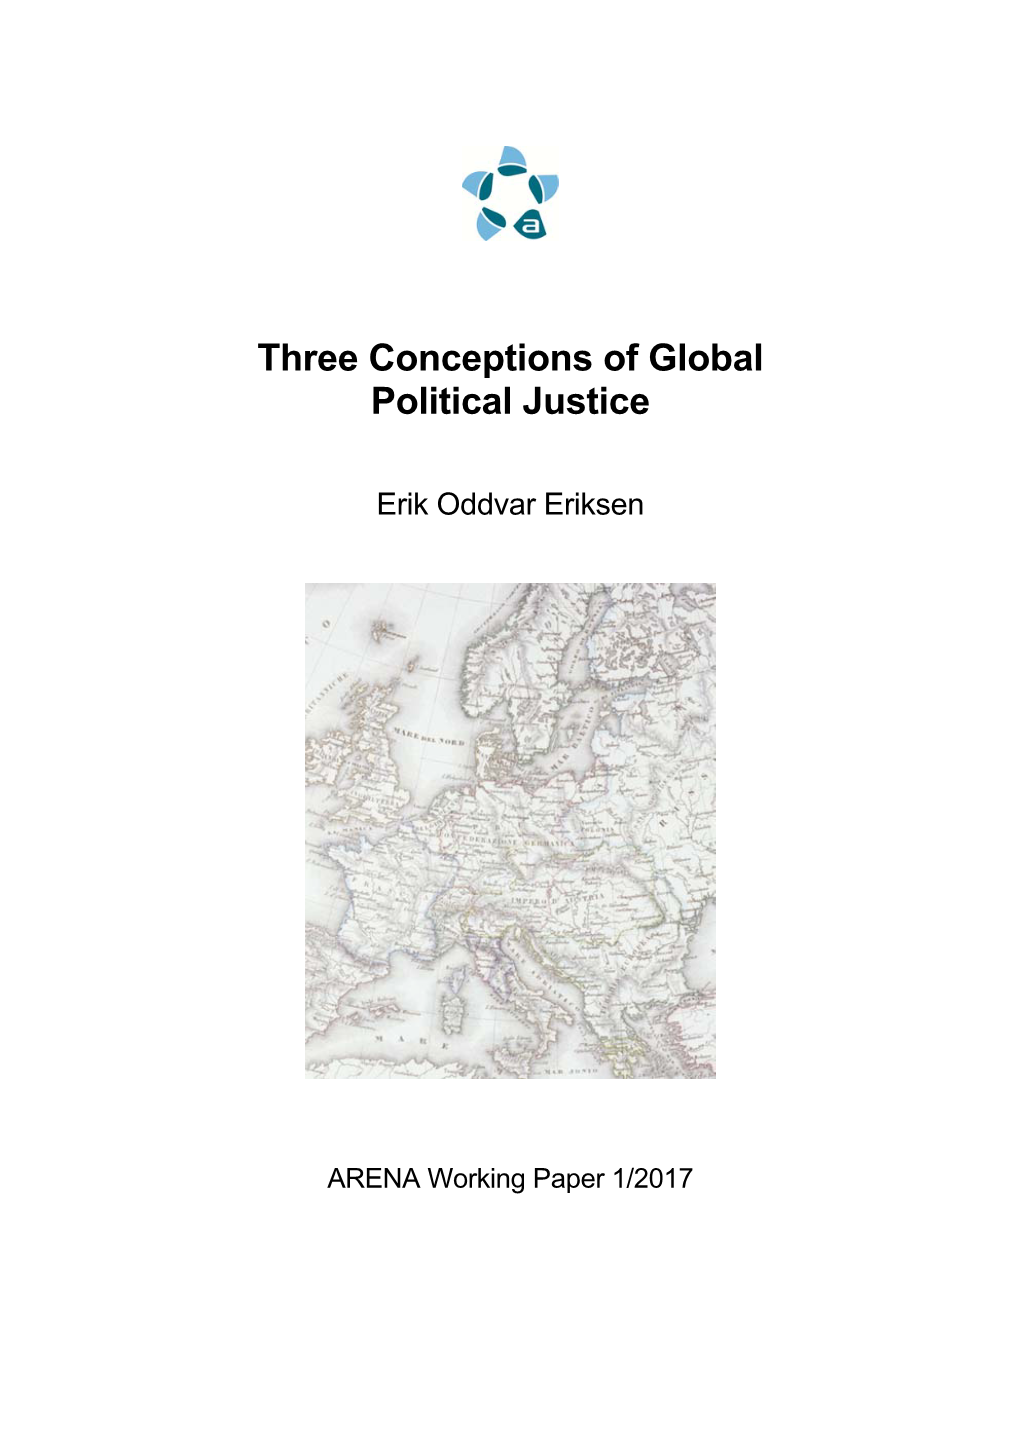 Three Conceptions of Global Political Justice